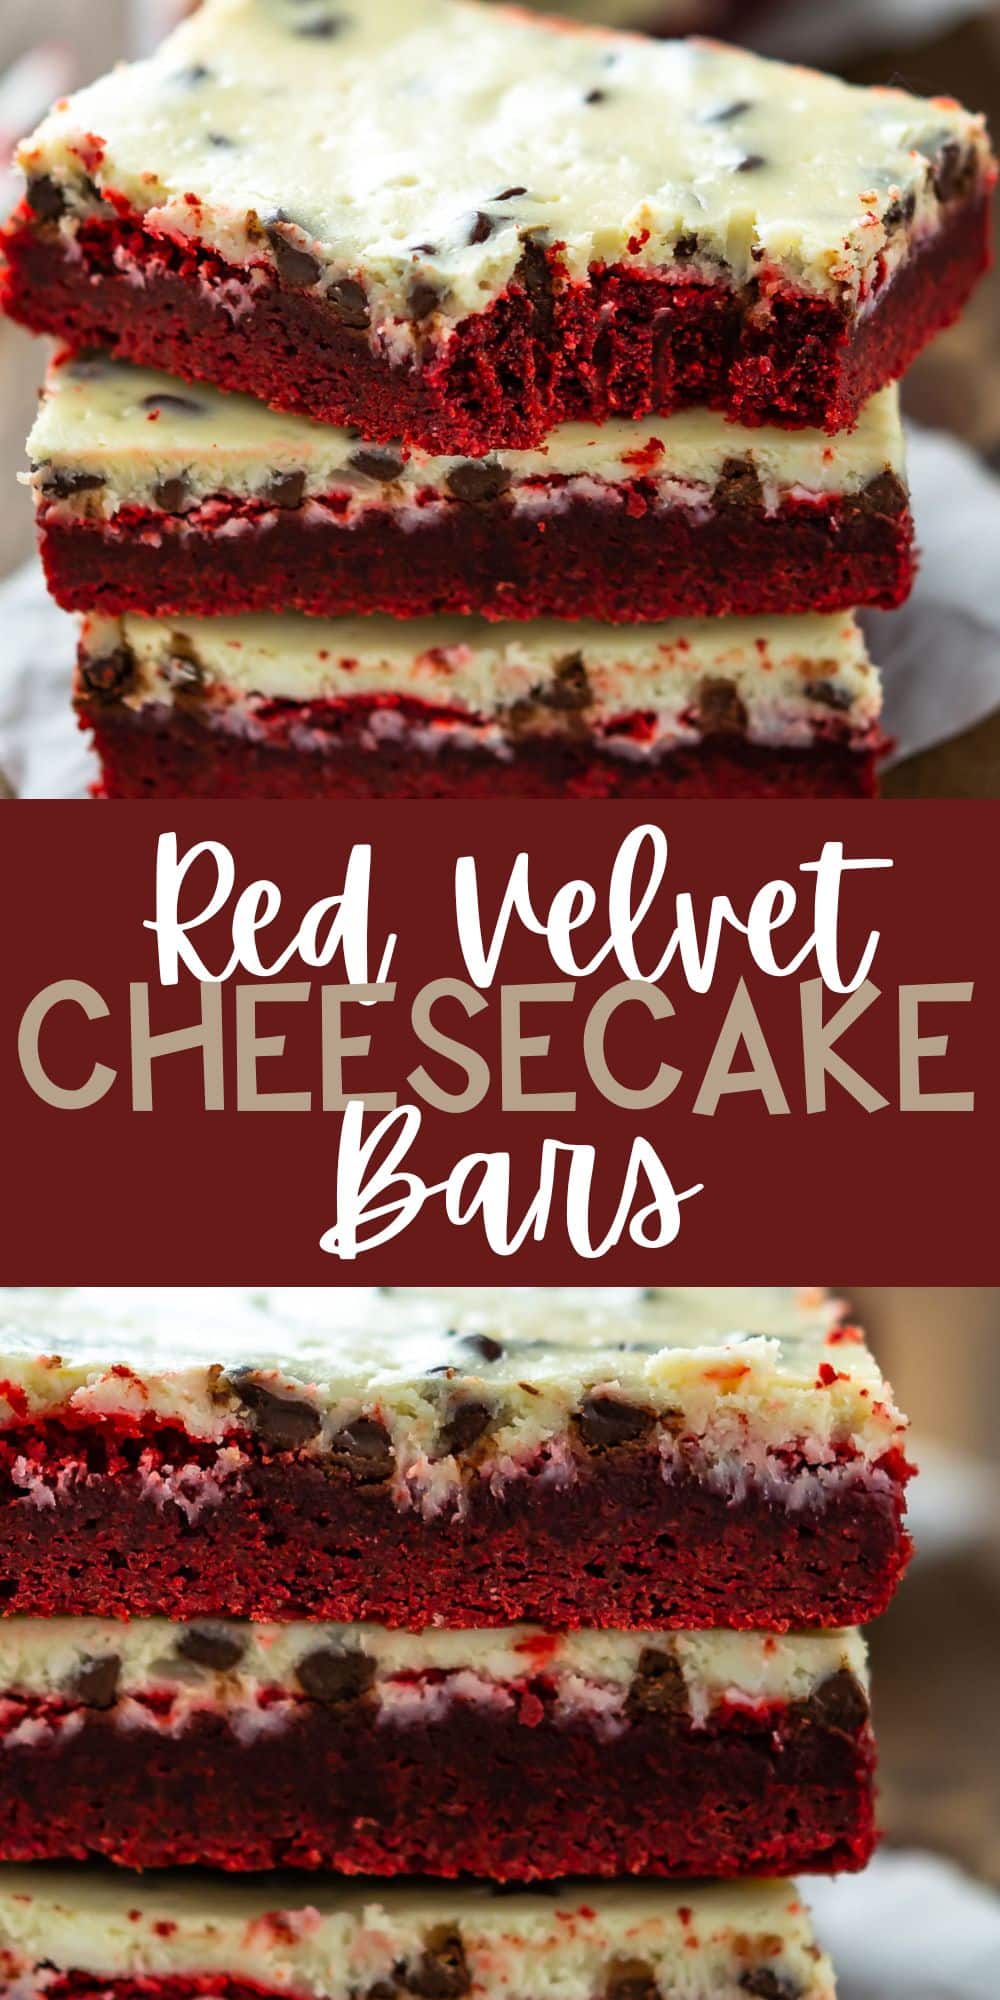 two photos of stacked red velvet bars with a yellow top of frosting with words on the image.